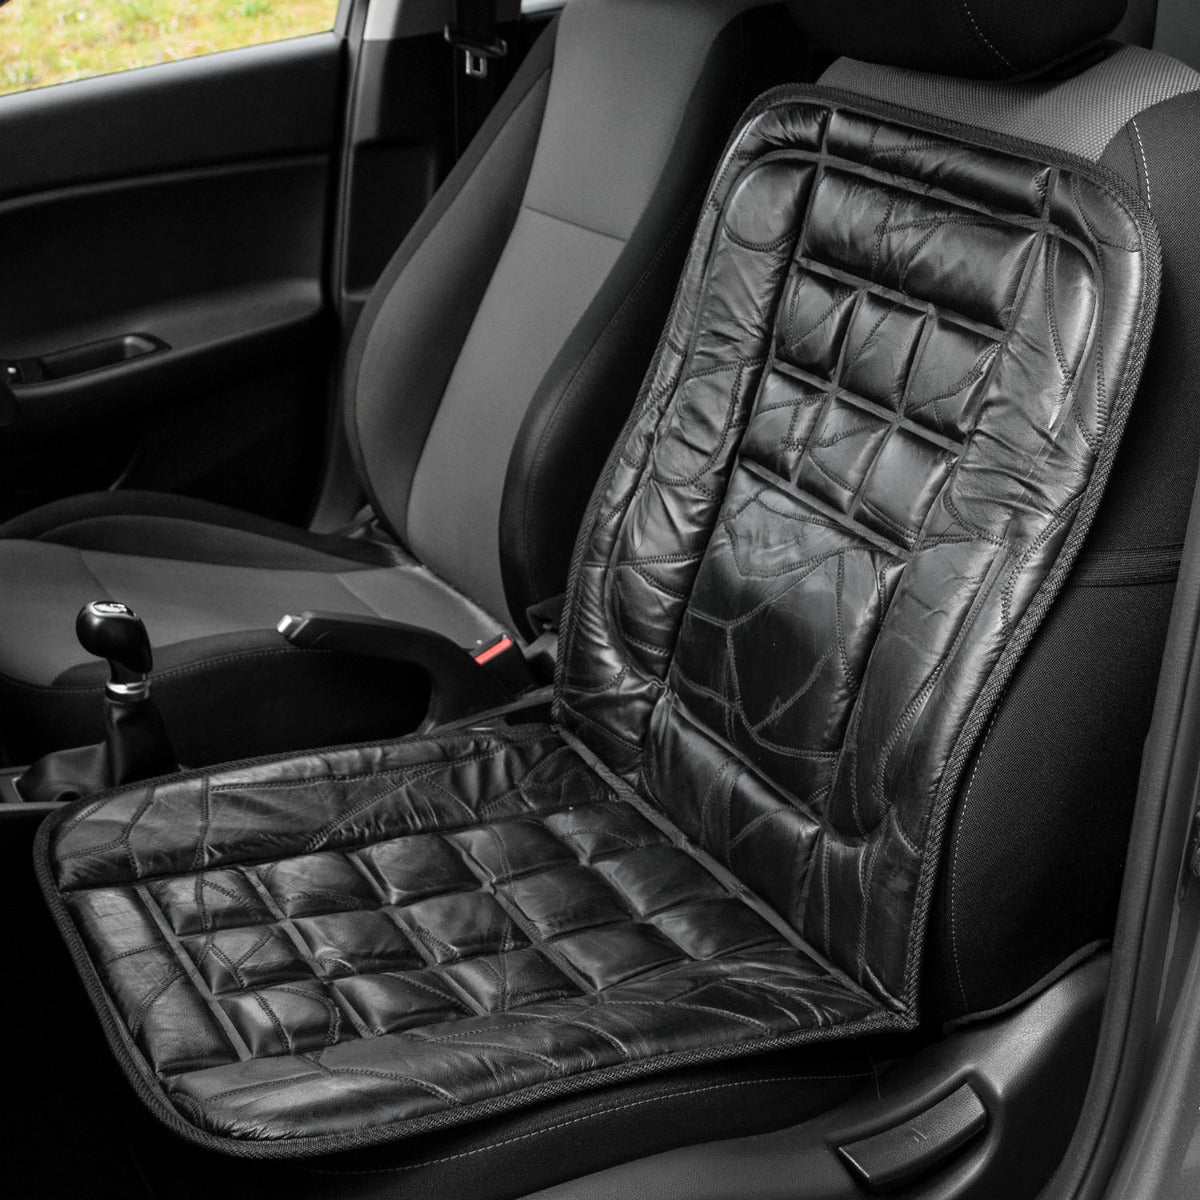 2 x Orthopaedic Leather Car Seat Covers - Black - Inspirely